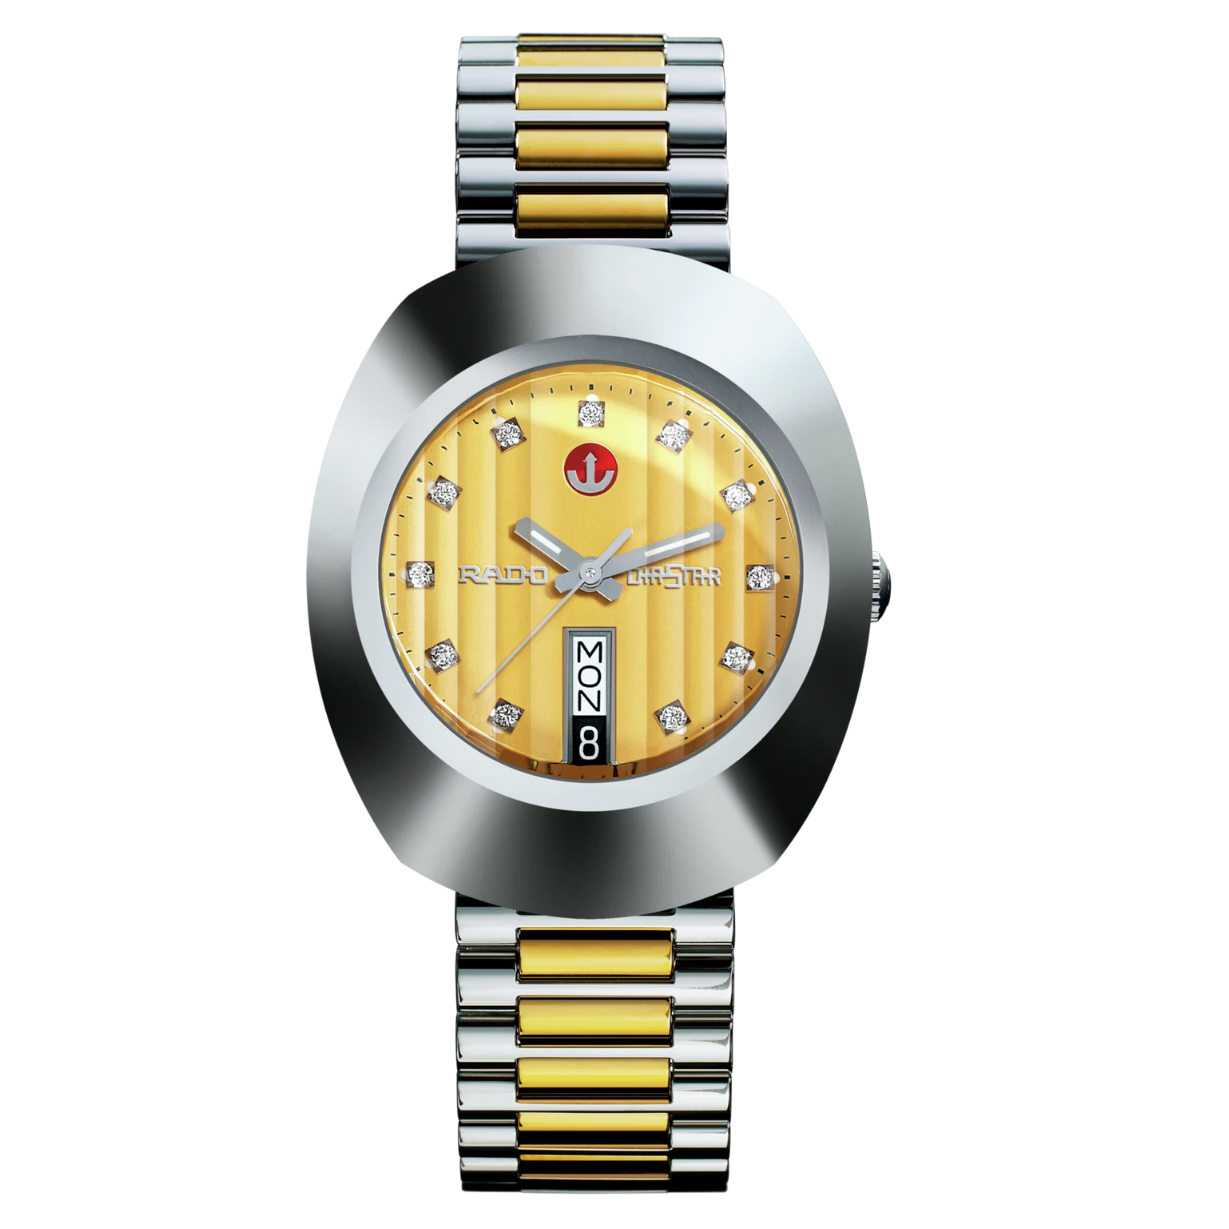 The Original Automatic Gold Stainless Steel